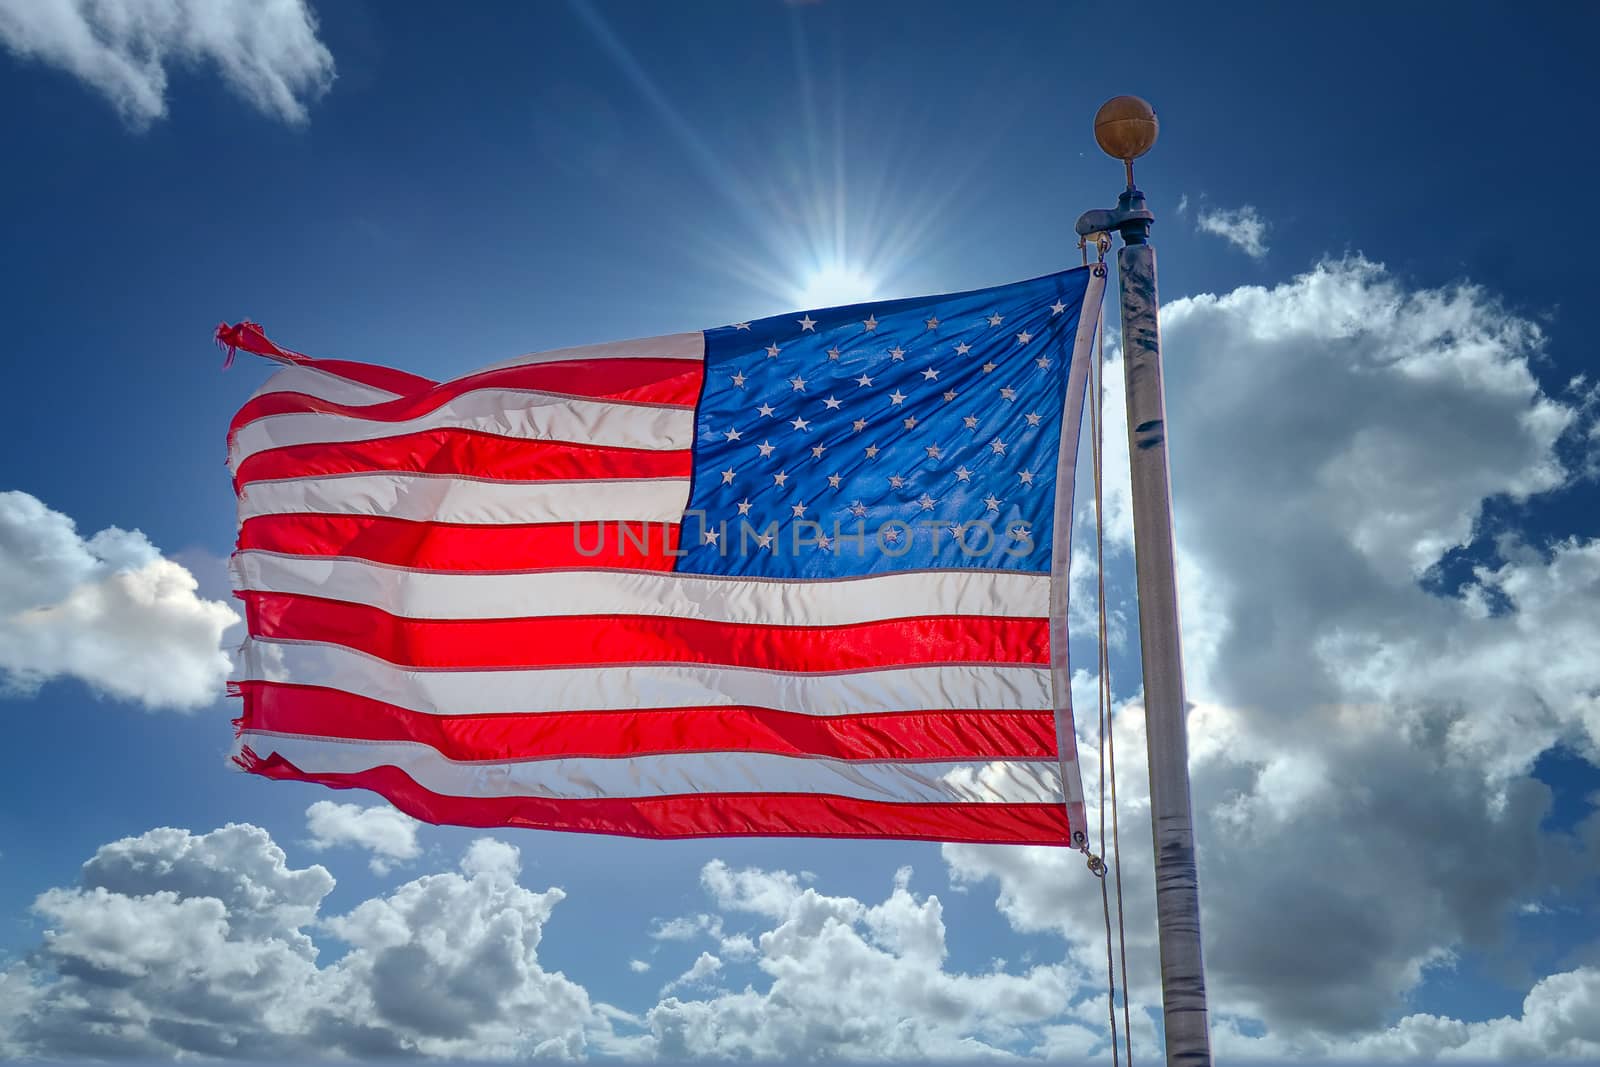 An American flag blowing in the wind and backlit from the sun